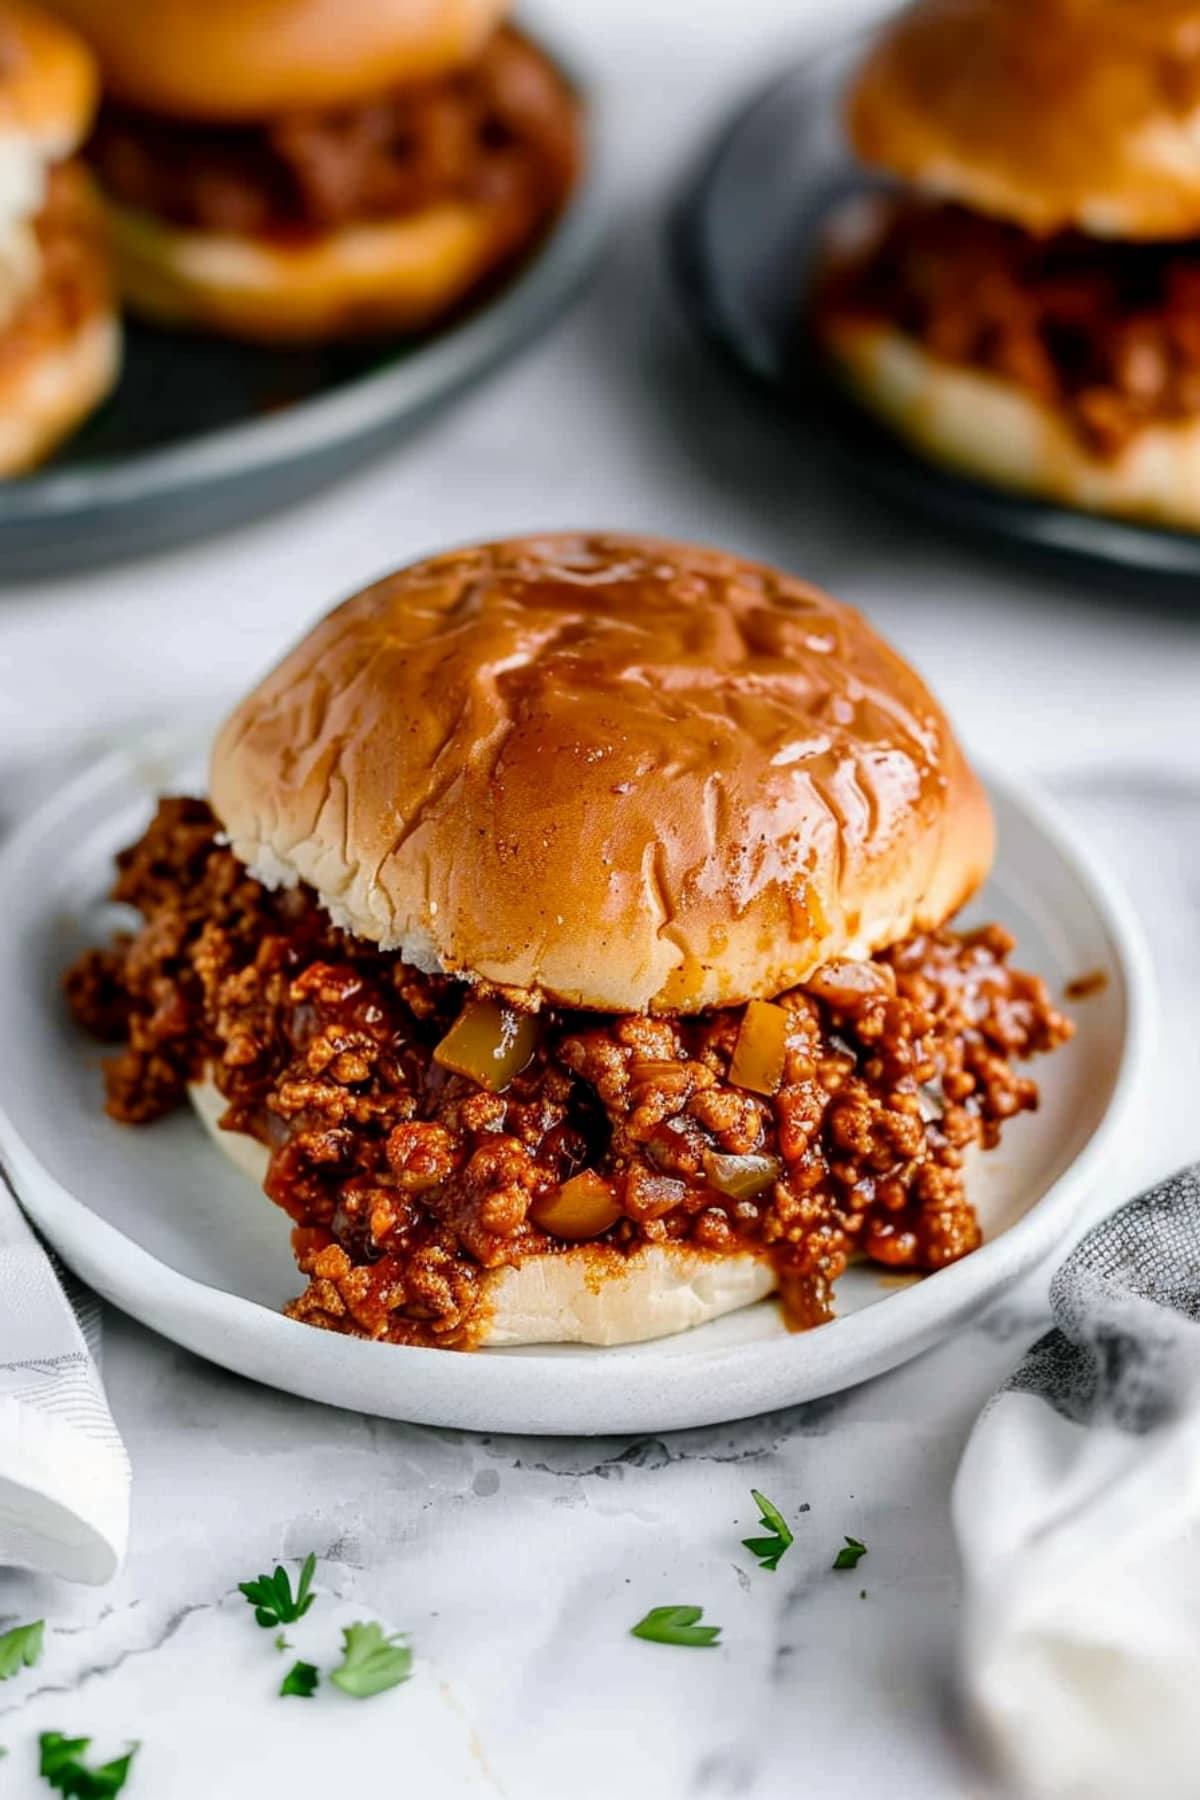 Juicy barbecue sloppy joes on toasted buns